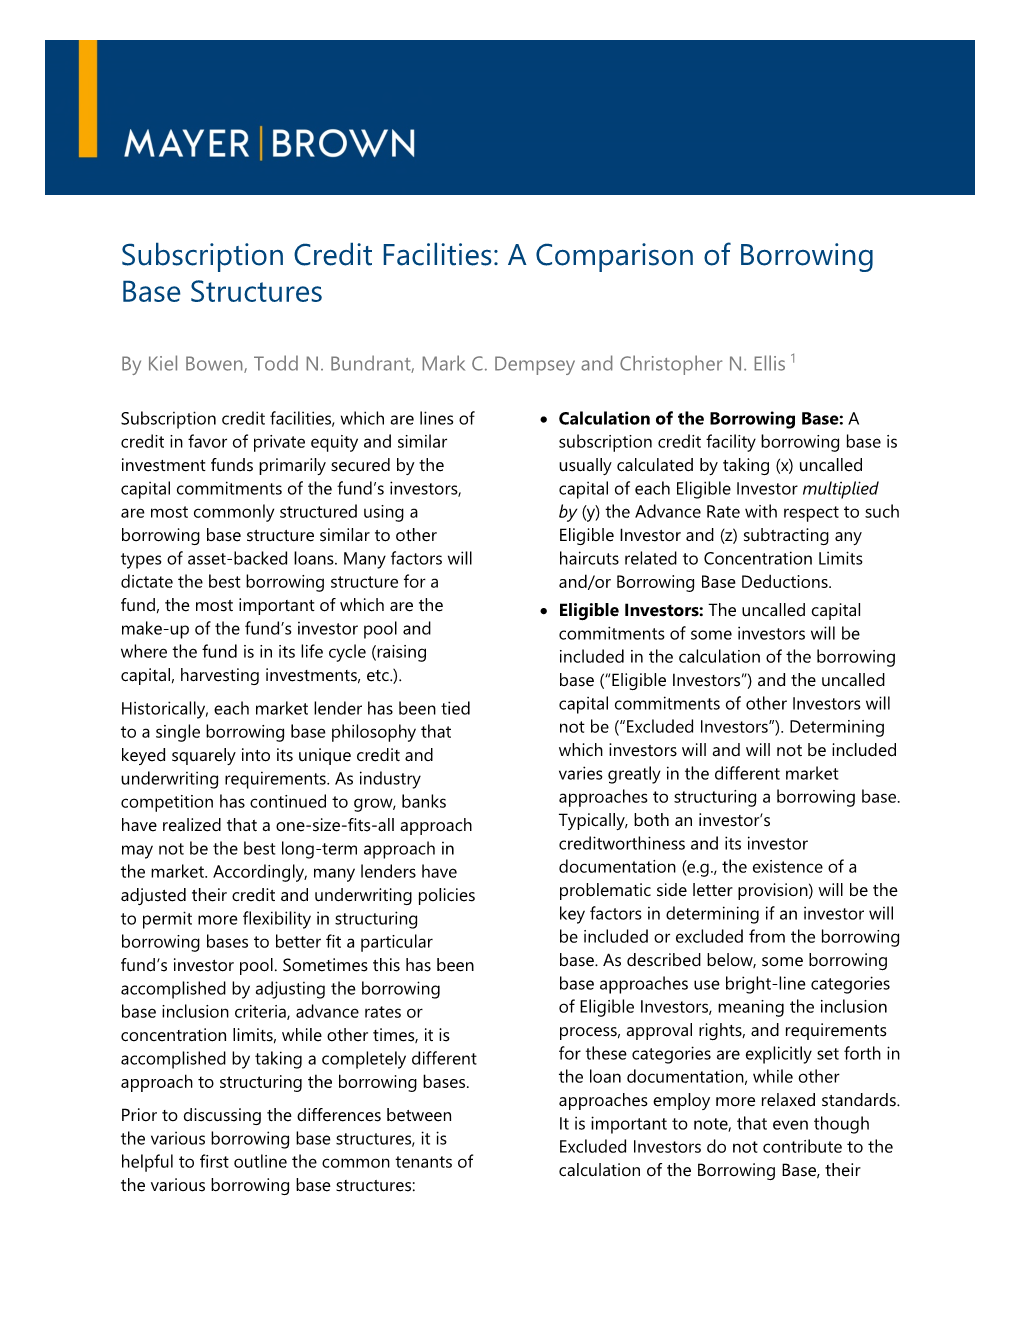 Subscription Credit Facilities: a Comparison of Borrowing Base Structures